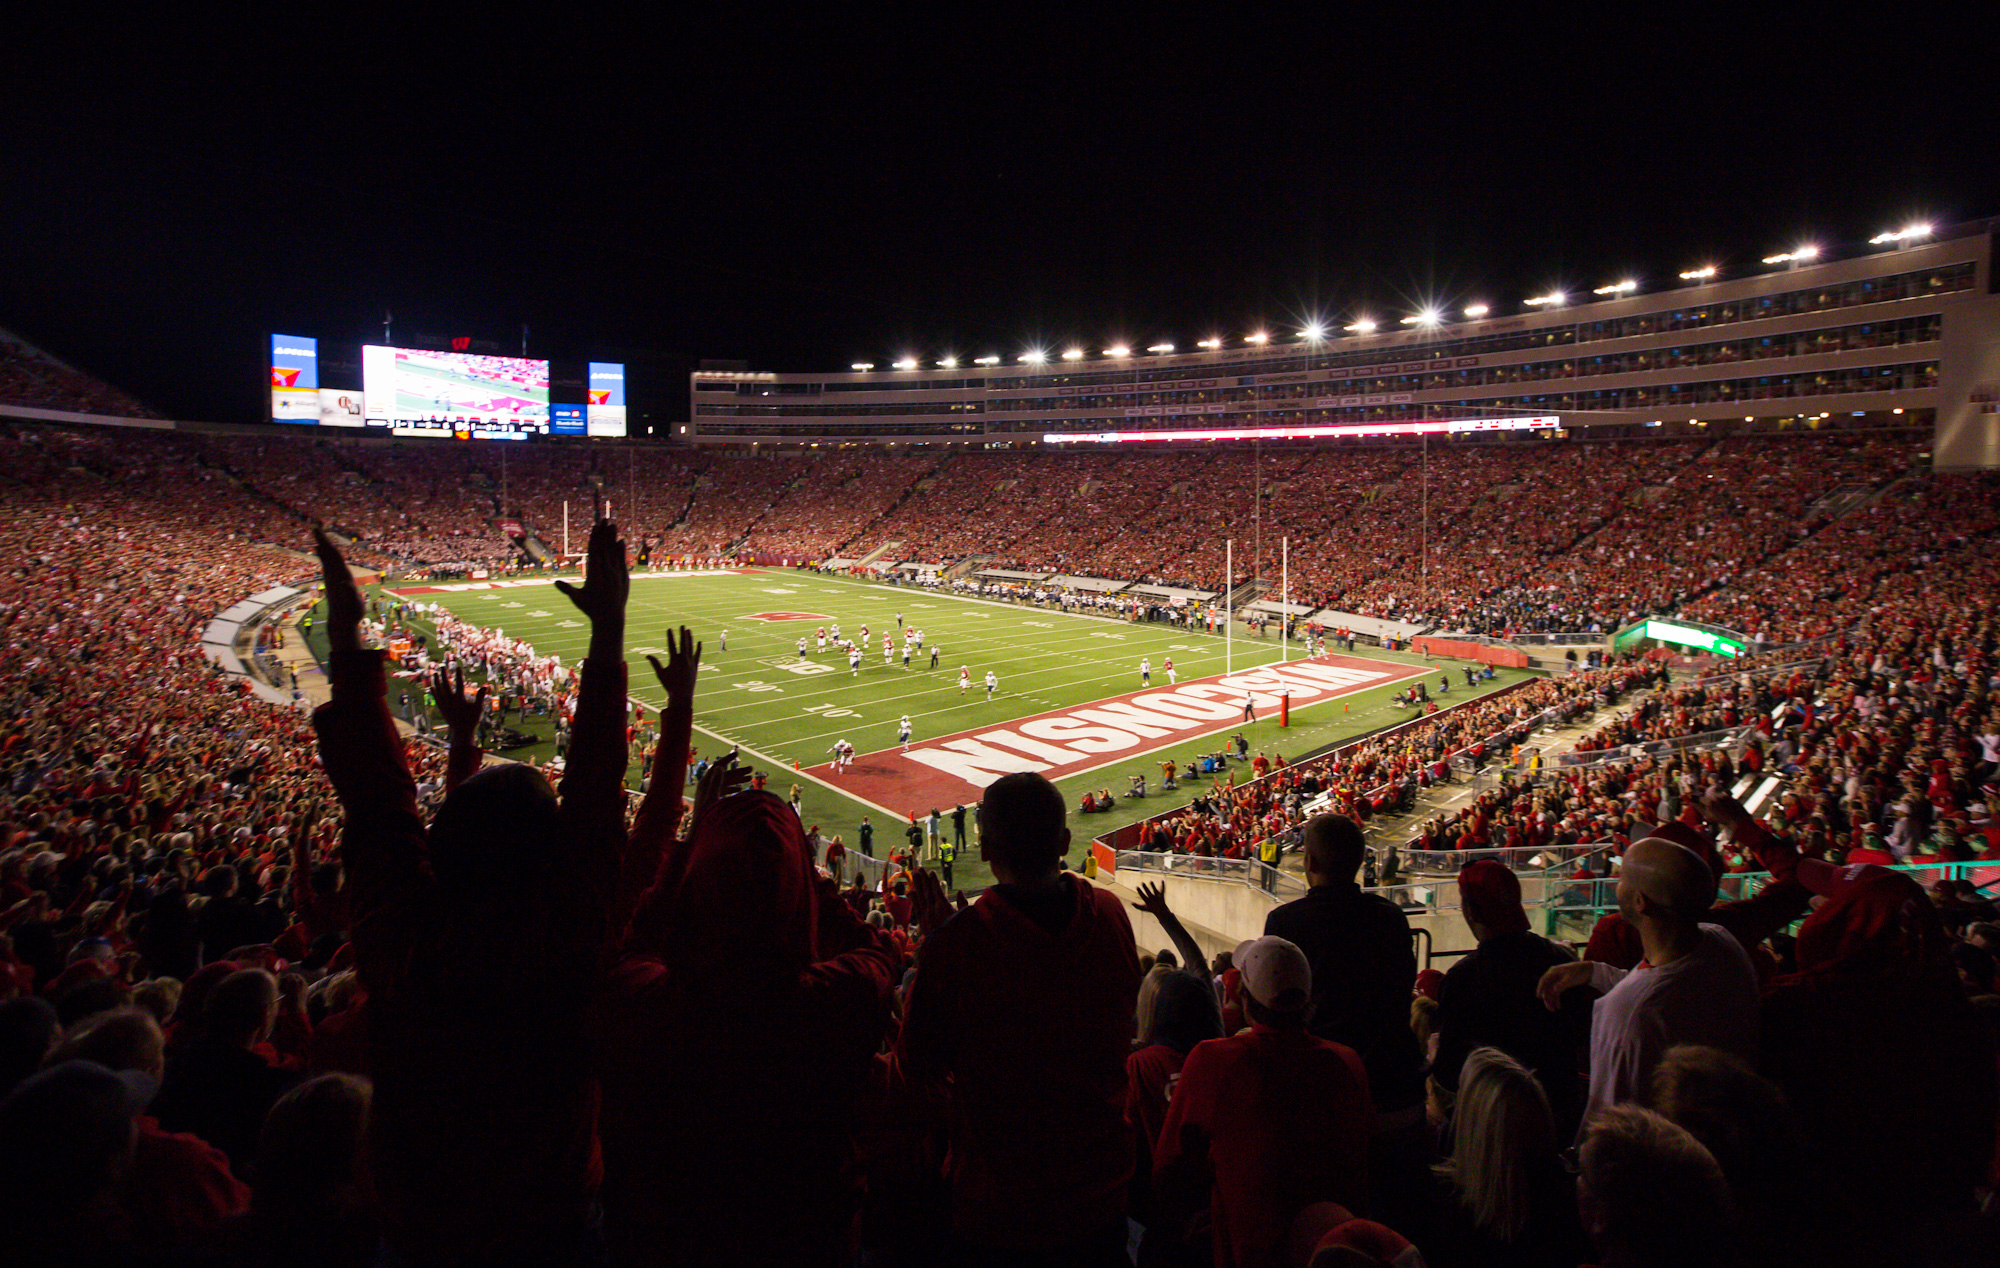 Fans celebrate after Wisconsin scored against Utah State during a football game in Madison, Wis.